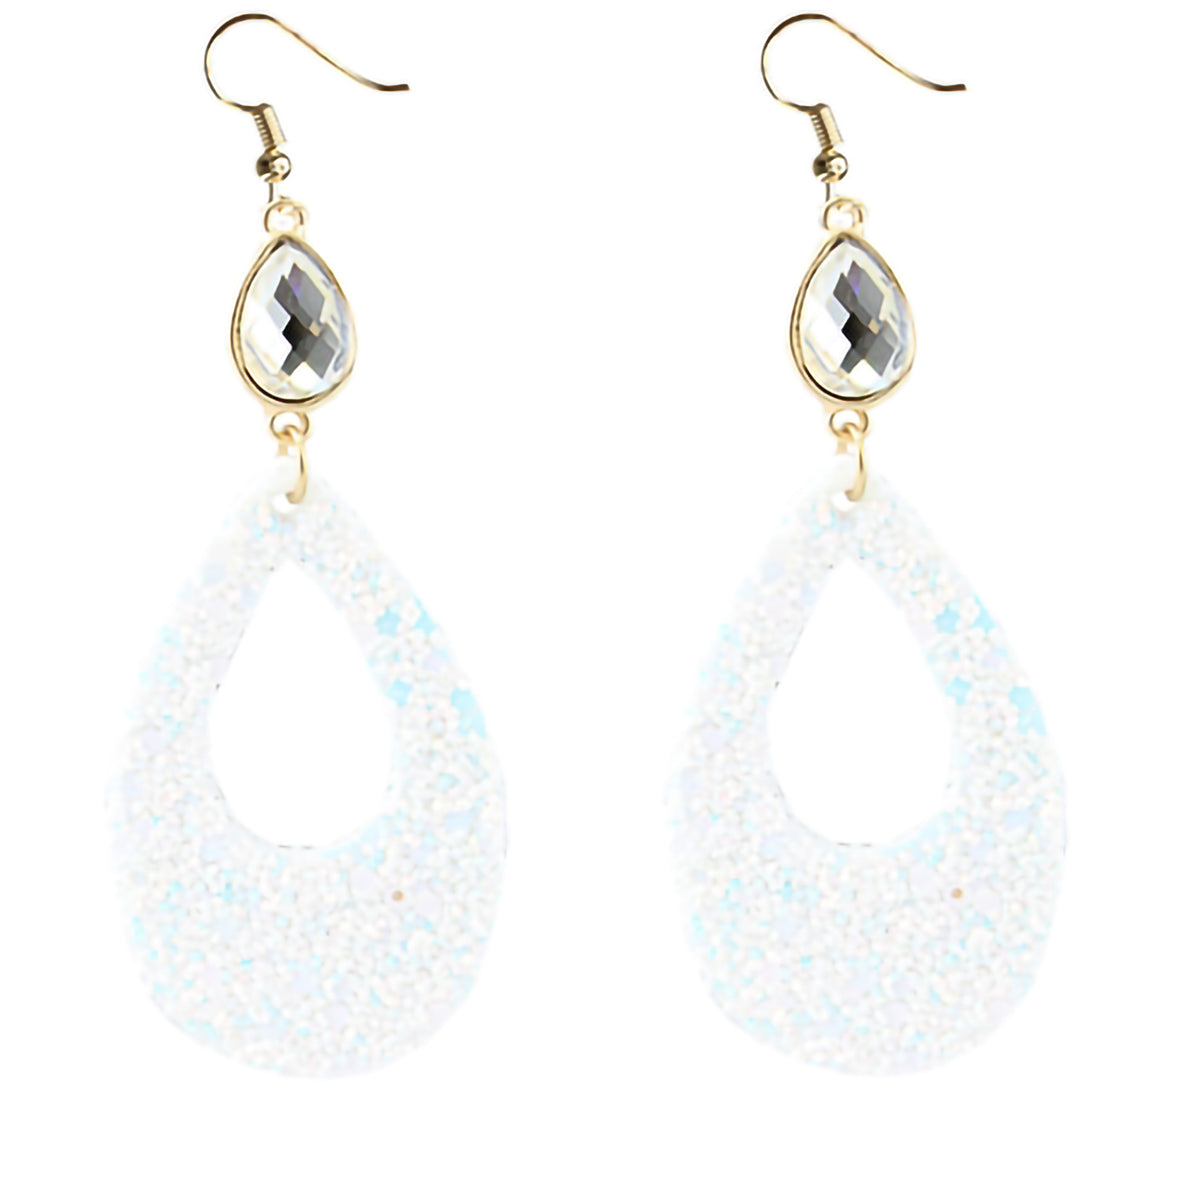 73640 - Druzzy Crystal Earrings - White AB - Fashion Jewelry Wholesale